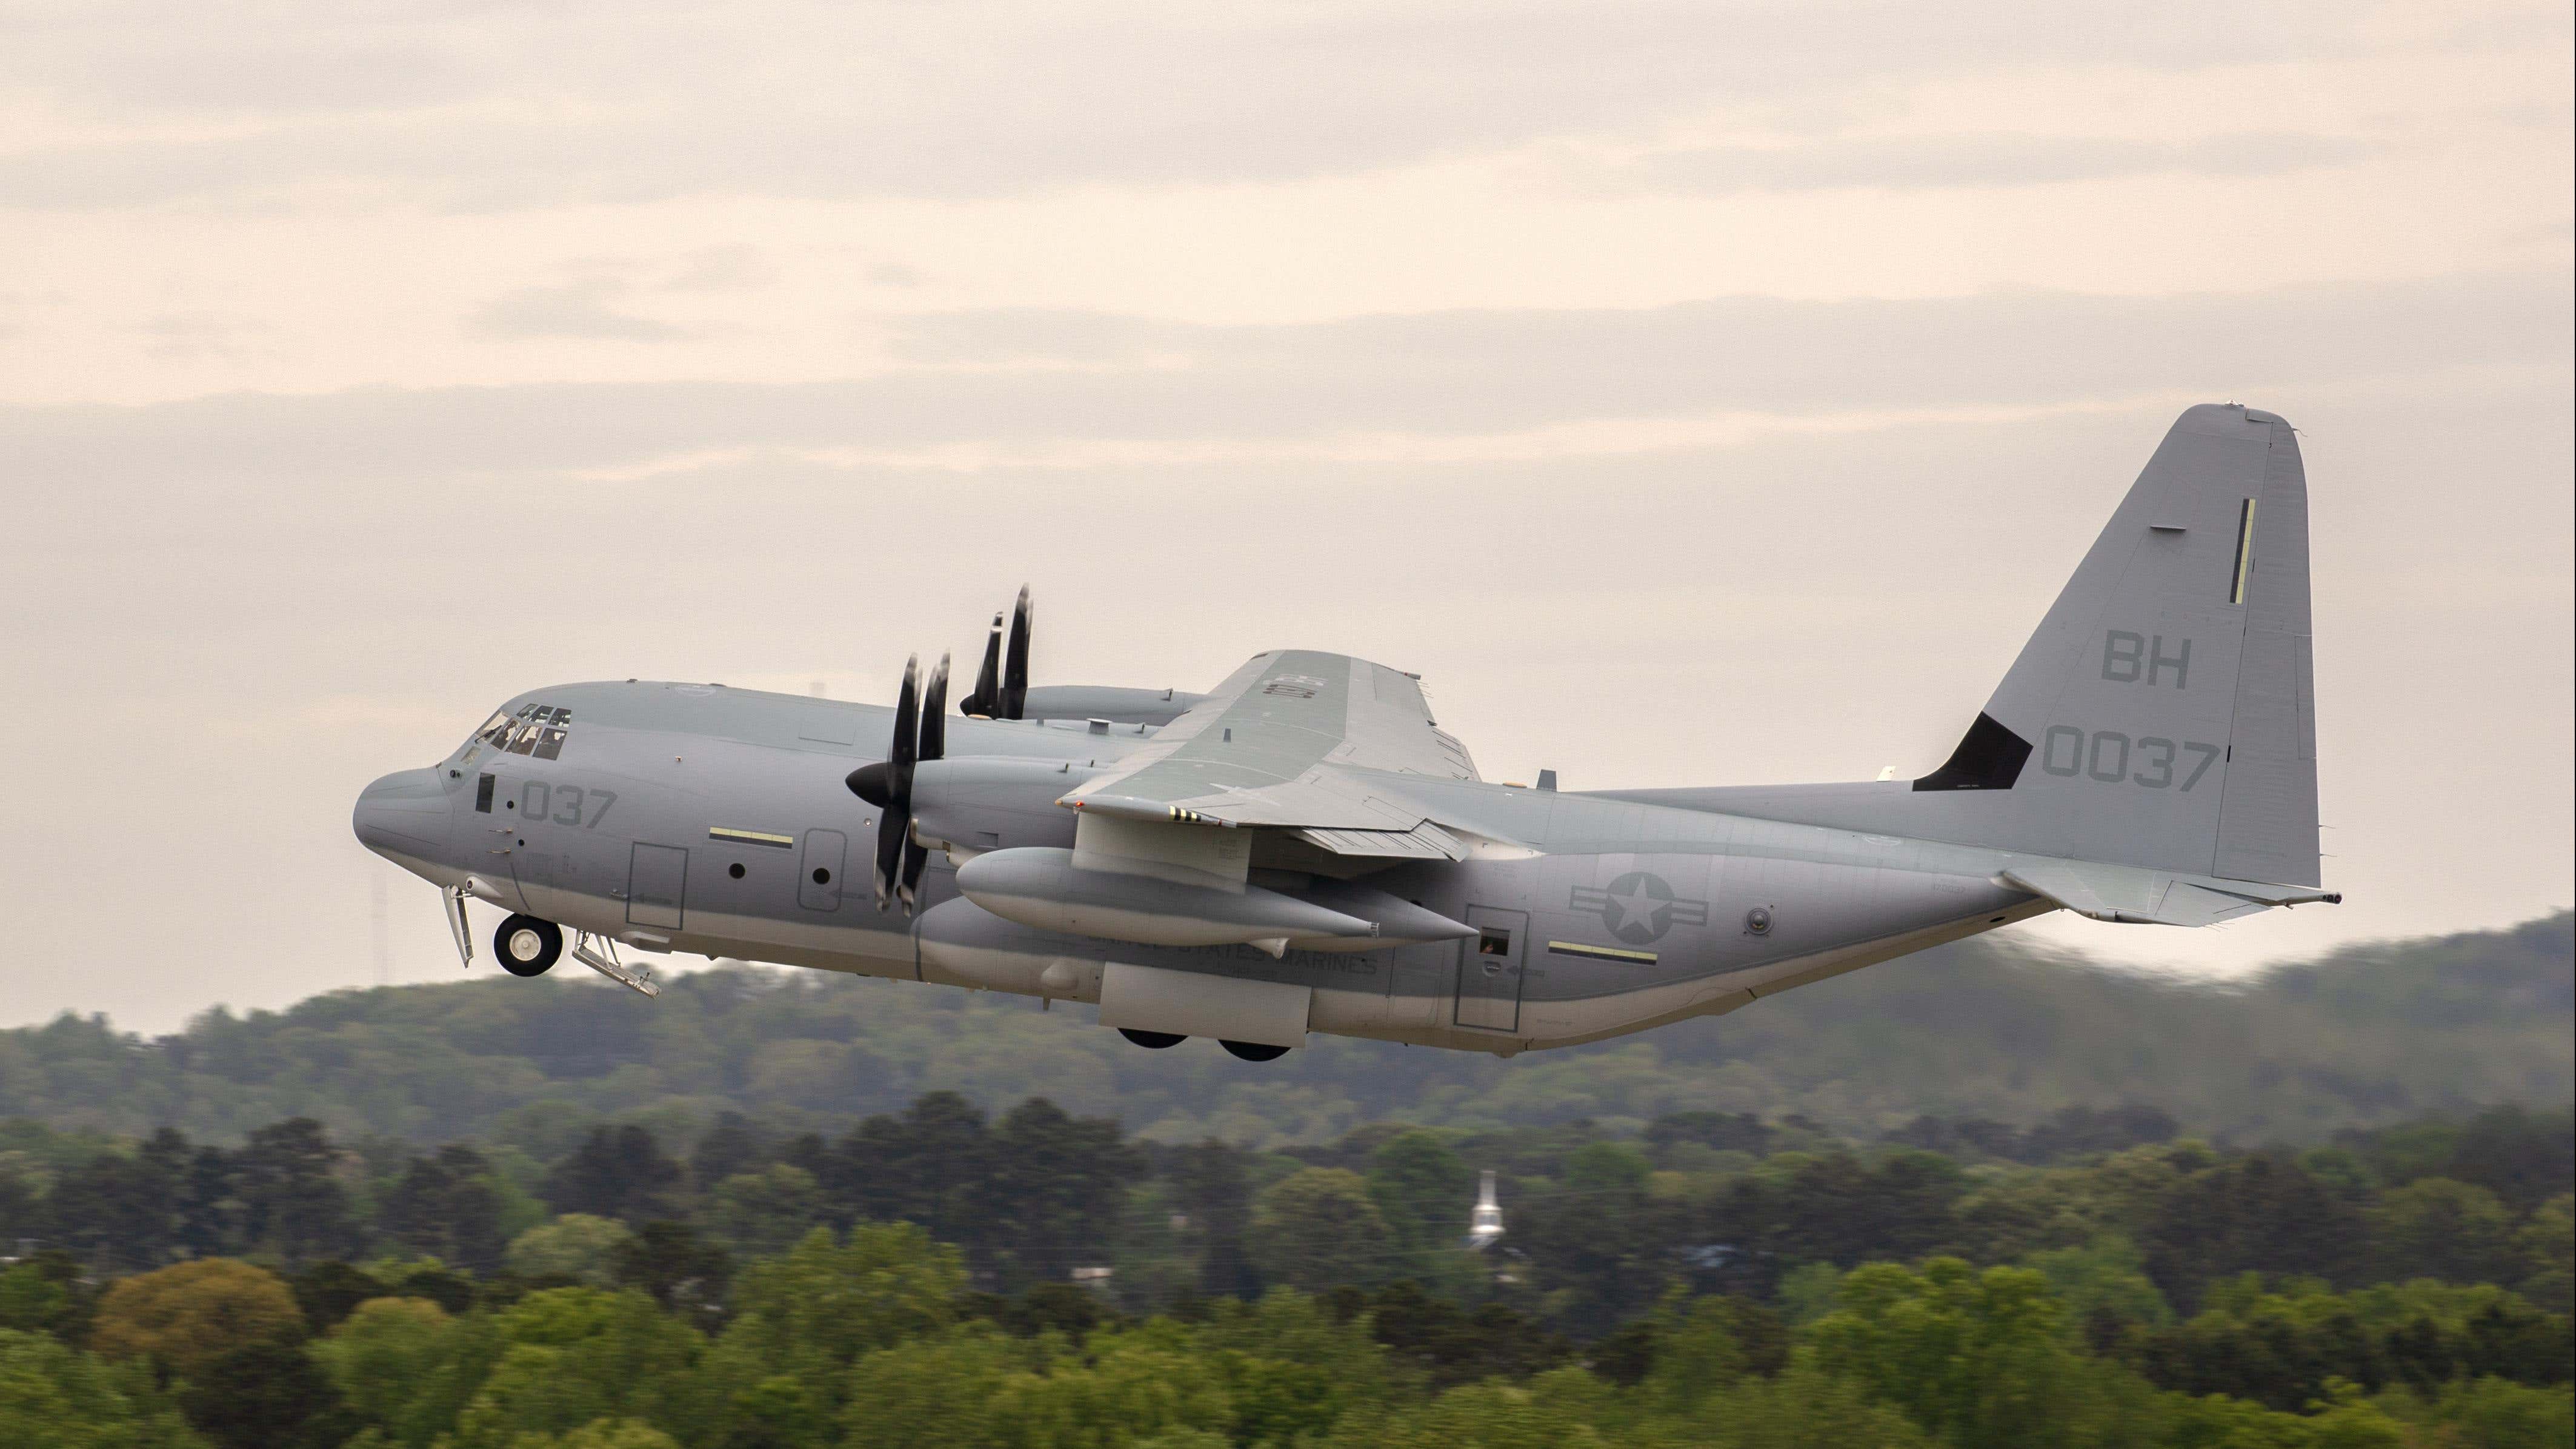 This Is Our First Look At The Navy’s Next 'Doomsday Plane,' The EC-130J TACAMO